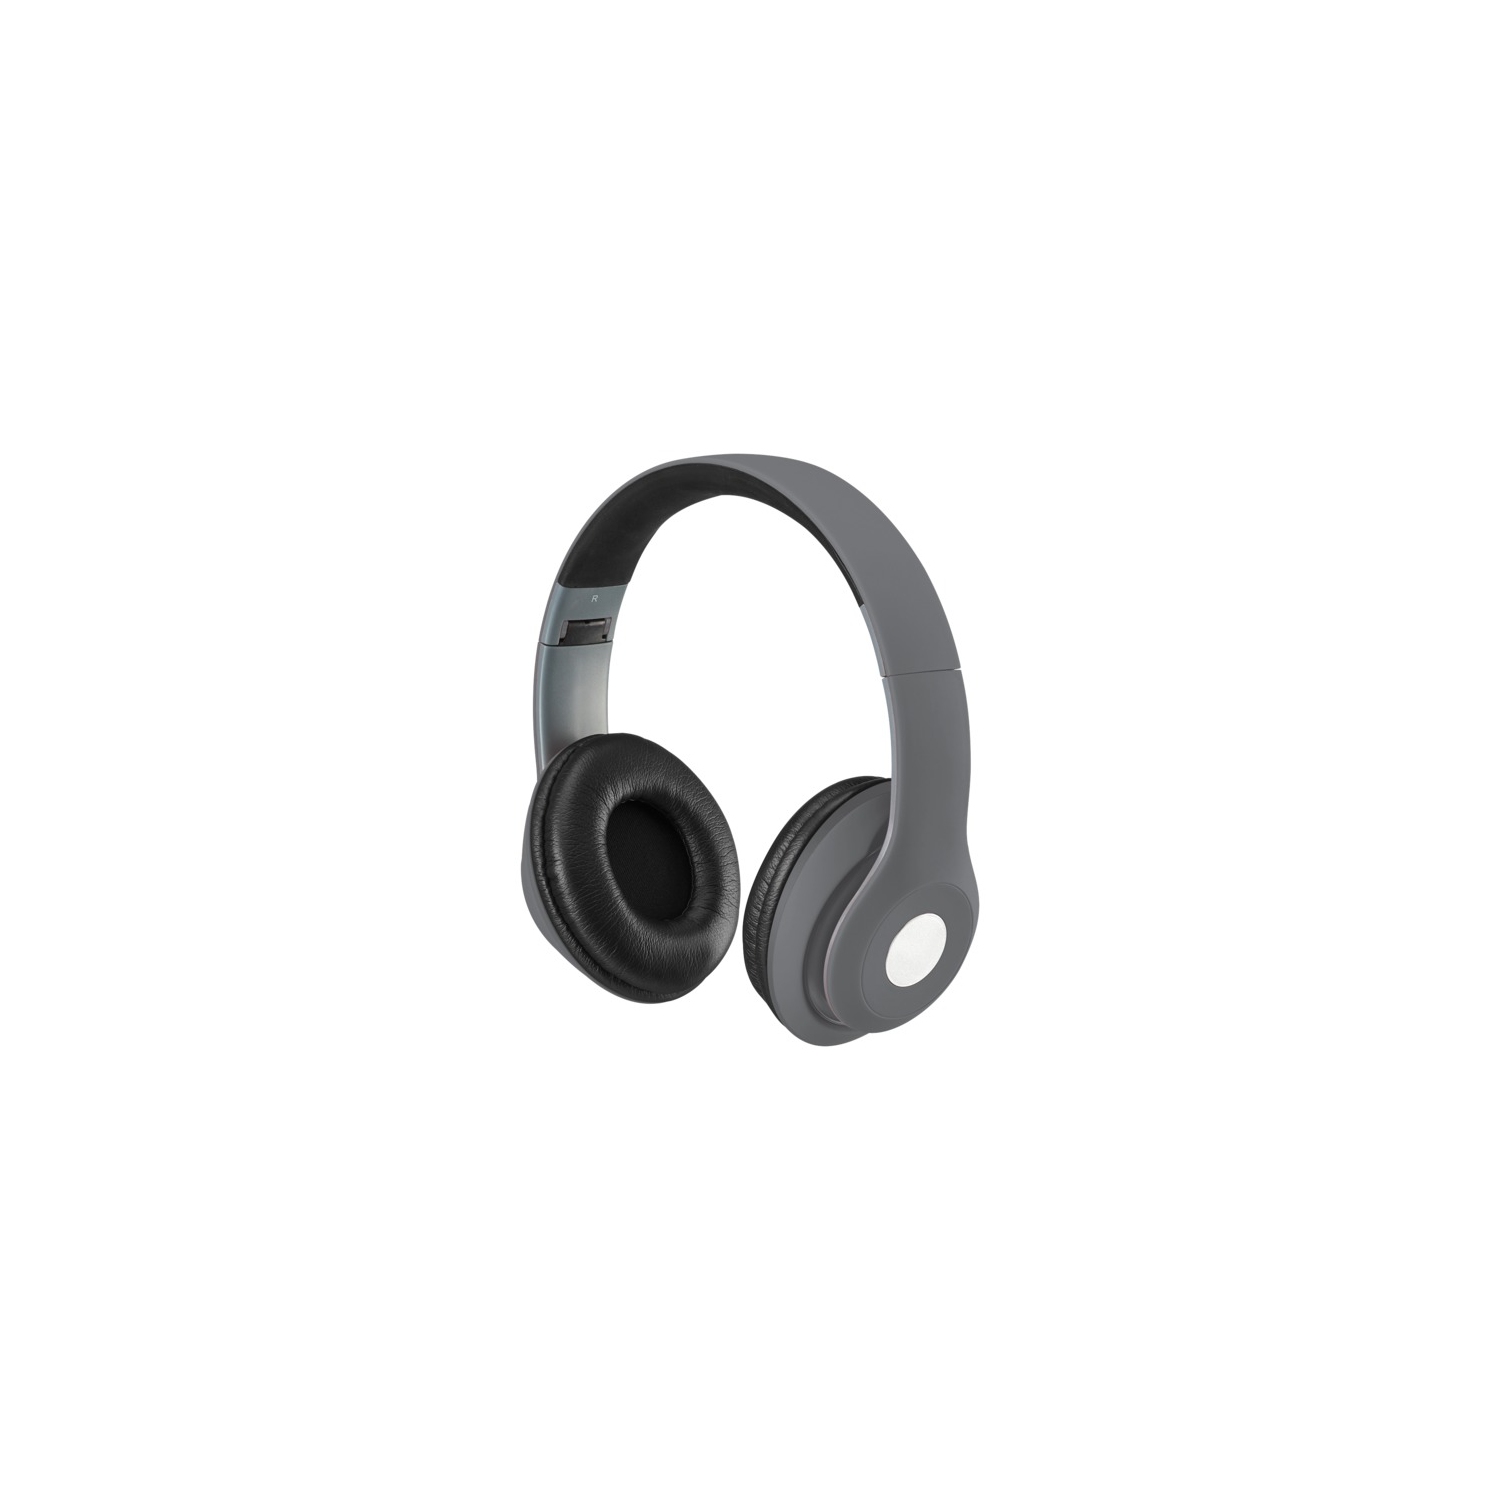 iLive Bluetooth On-Ear Headphones, Includes 3.5mm Audio Cable and Micro USB to USB Cable, Matte Gray (IAHB48MG)